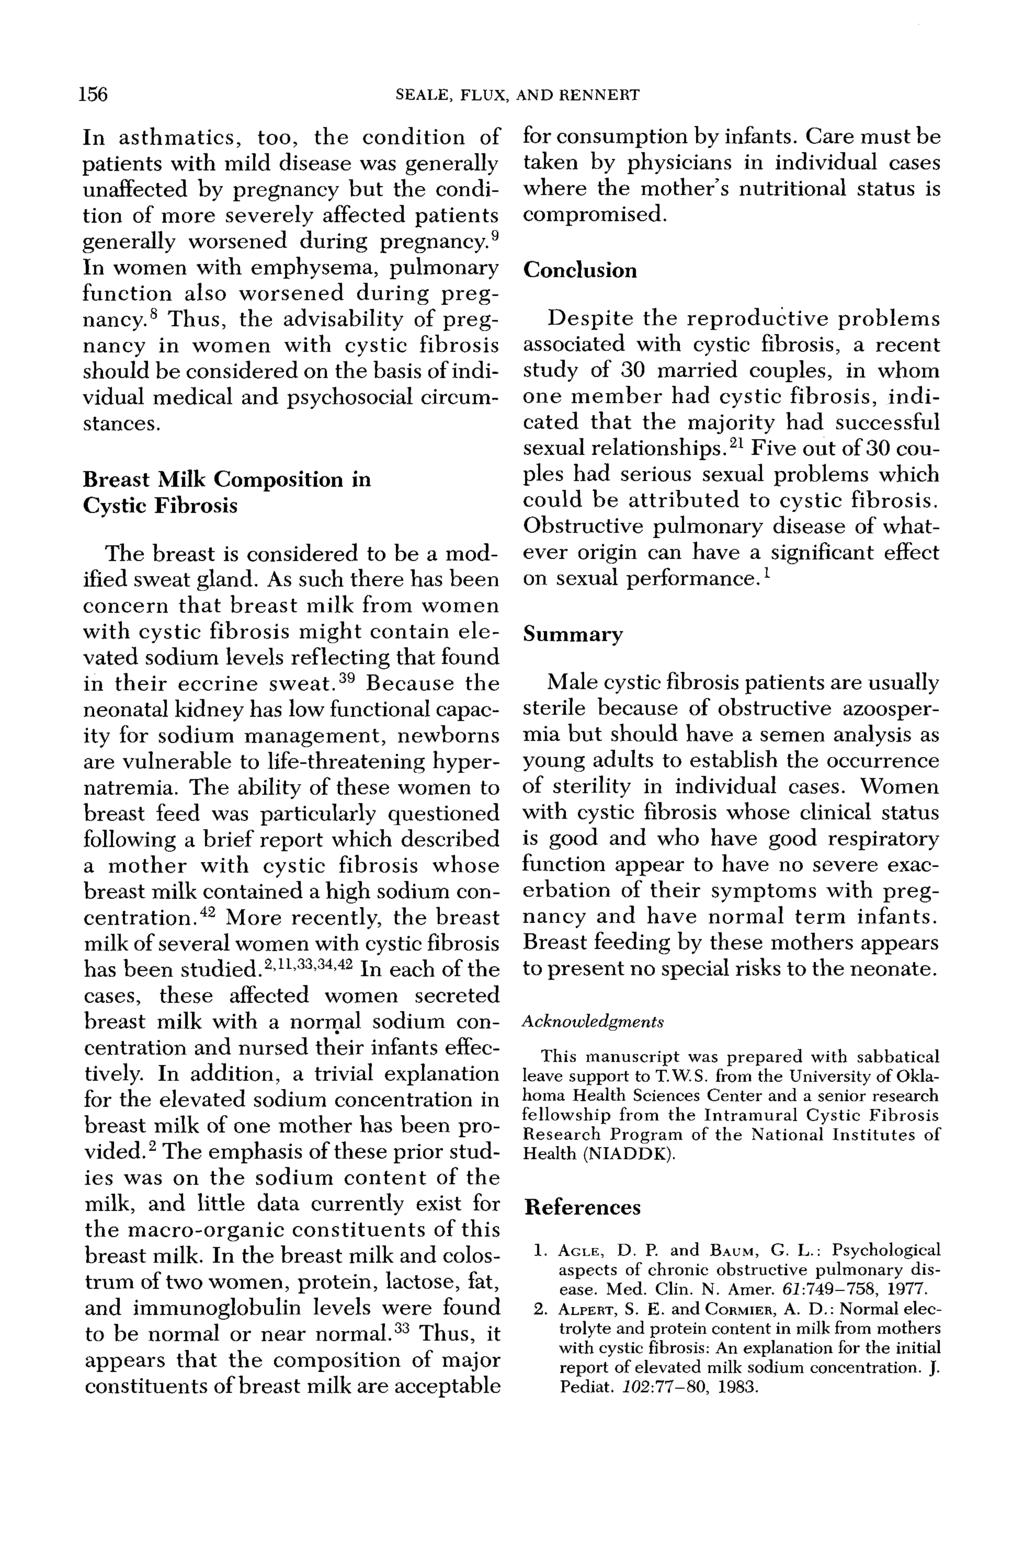 156 SEALE, FLUX, AND RENNERT In asthm atics, too, the condition of patients with mild disease was generally unaffected by pregnancy b u t the condition of m ore severely affected patients generally w